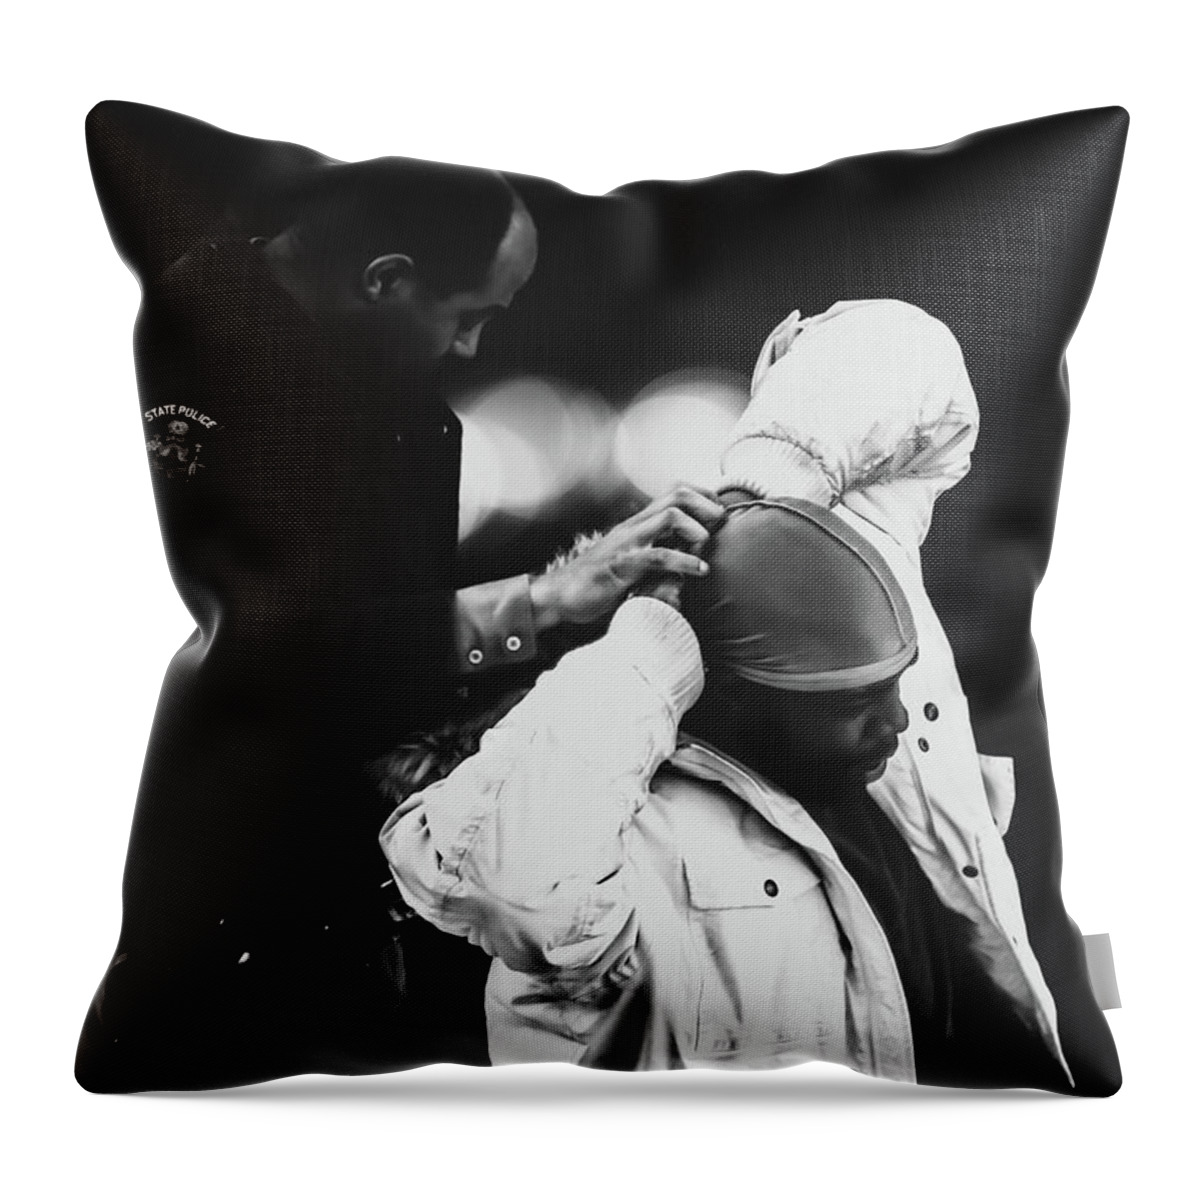 Police Throw Pillow featuring the photograph Suspect by Bob Orsillo